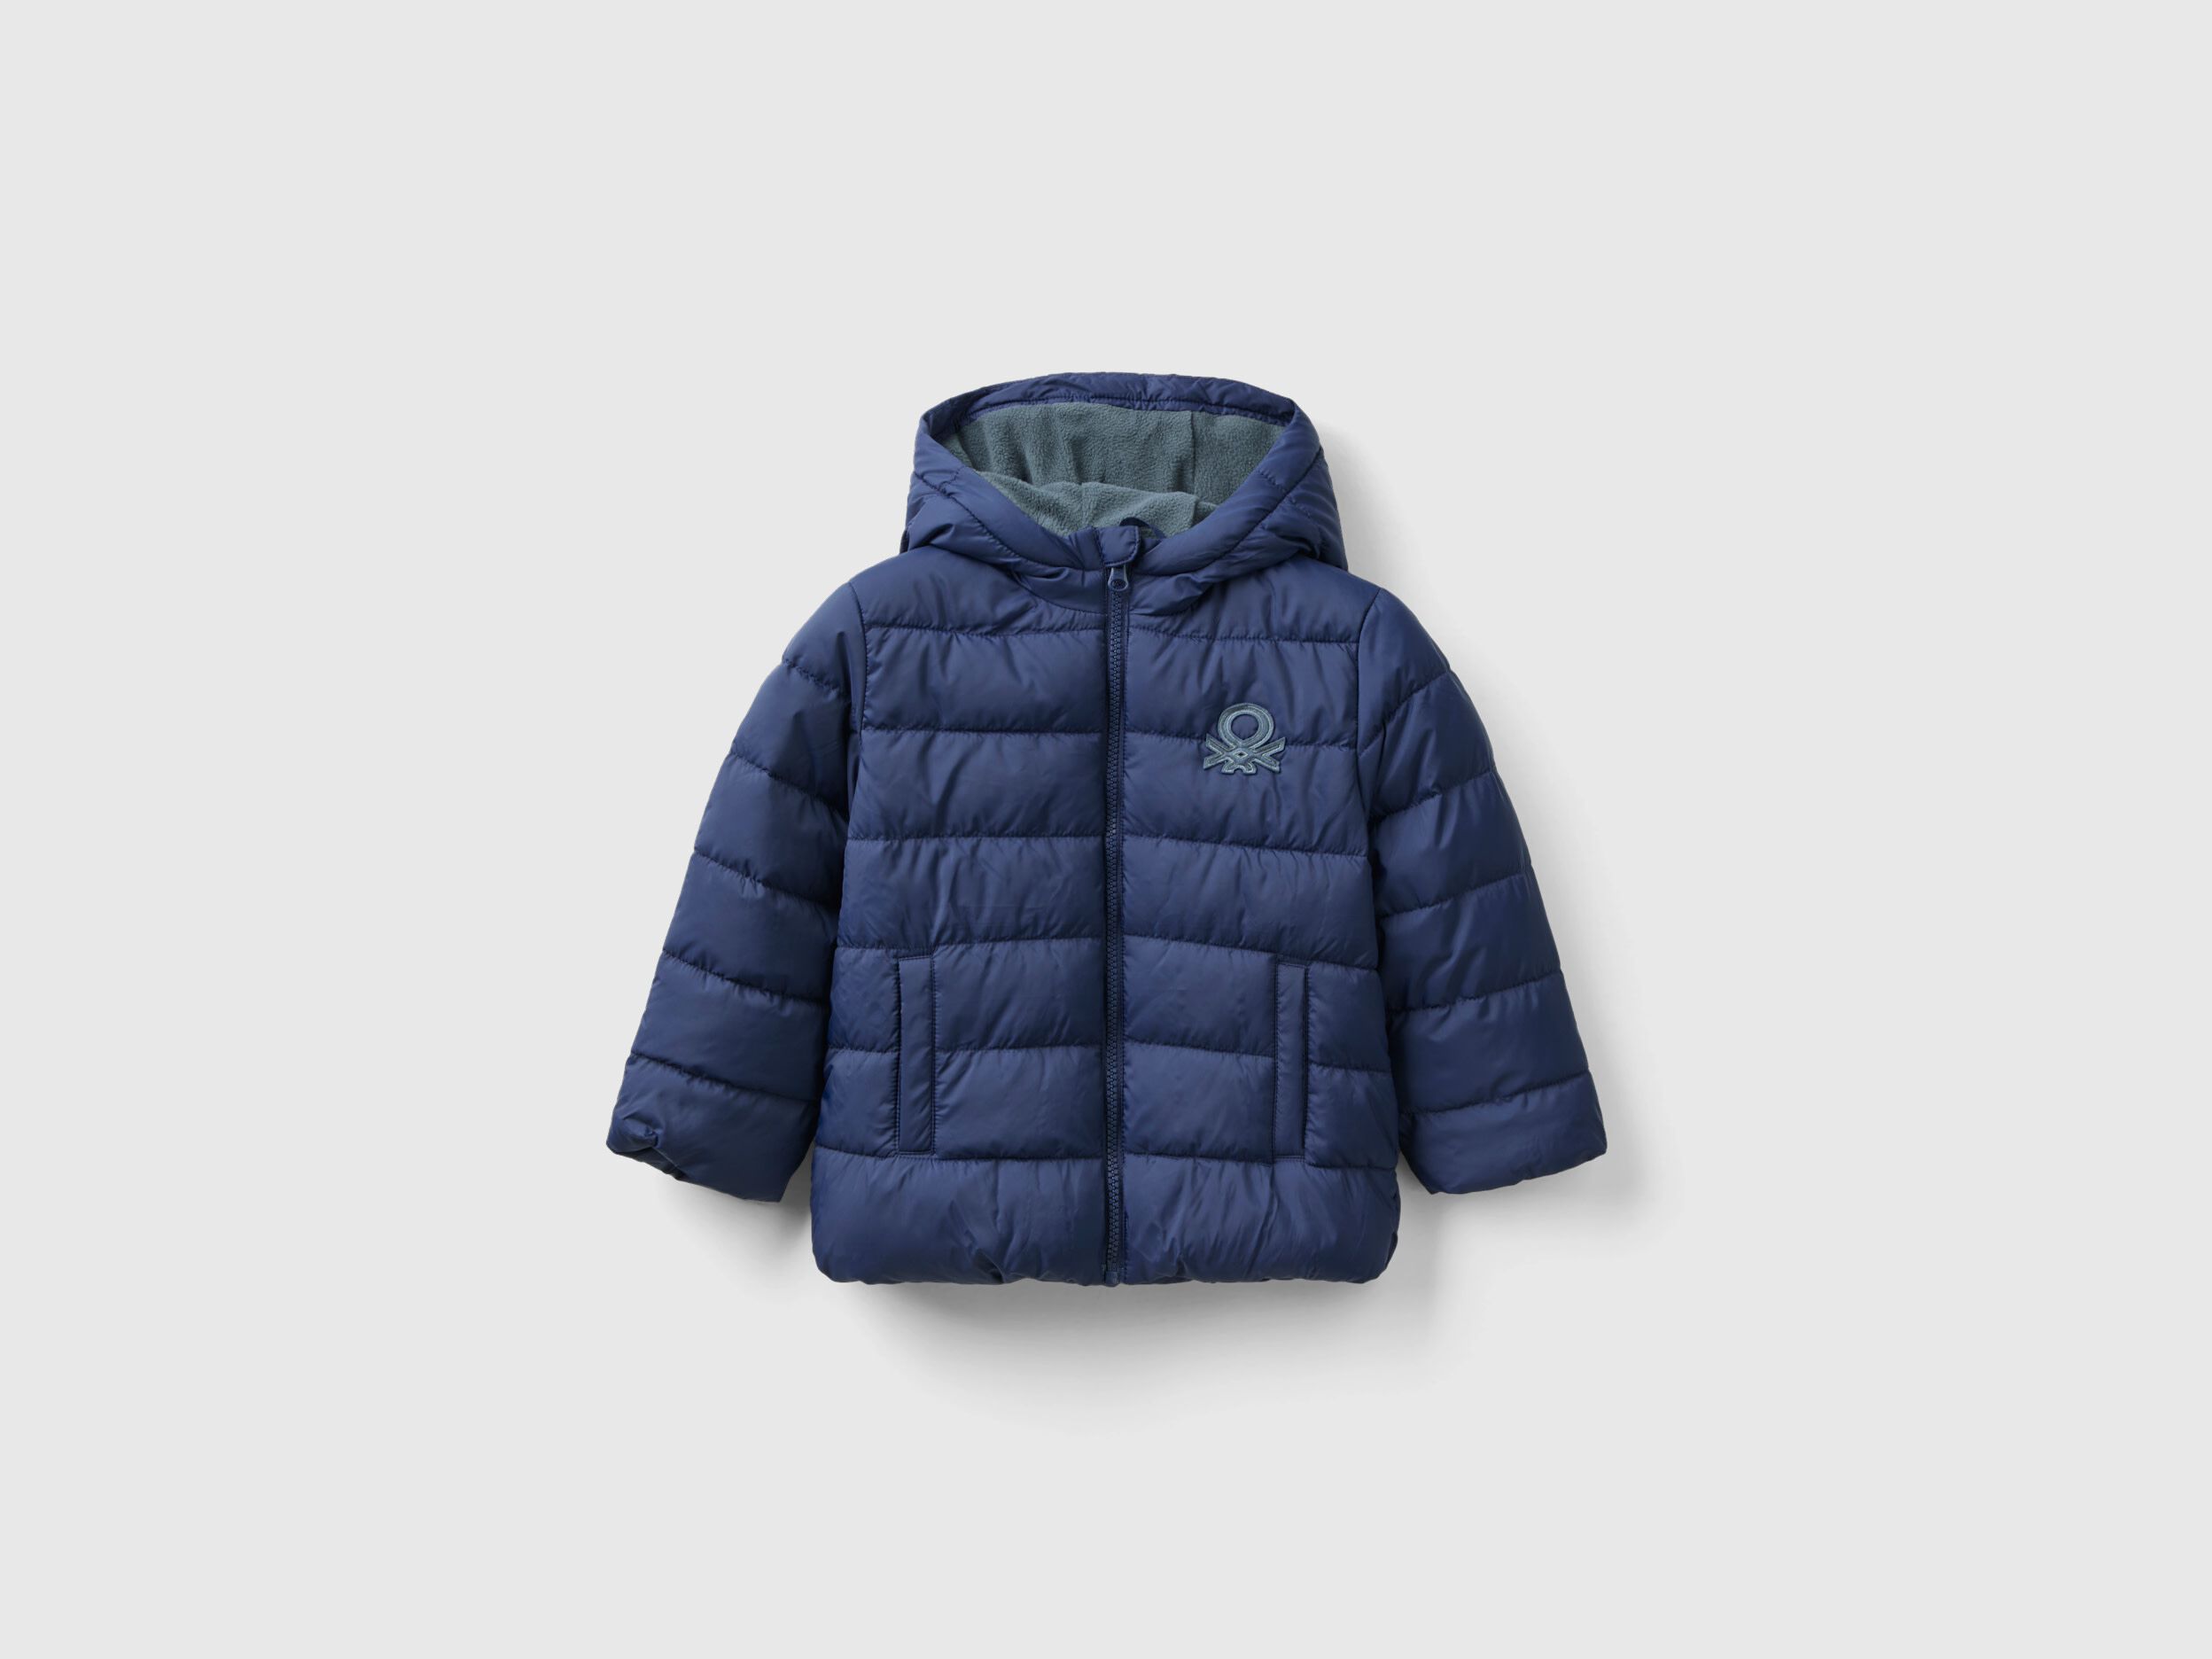 Kids Winter Jacket (United Colors of Benetton) see details for sizing,  Women's Fashion, Coats, Jackets and Outerwear on Carousell